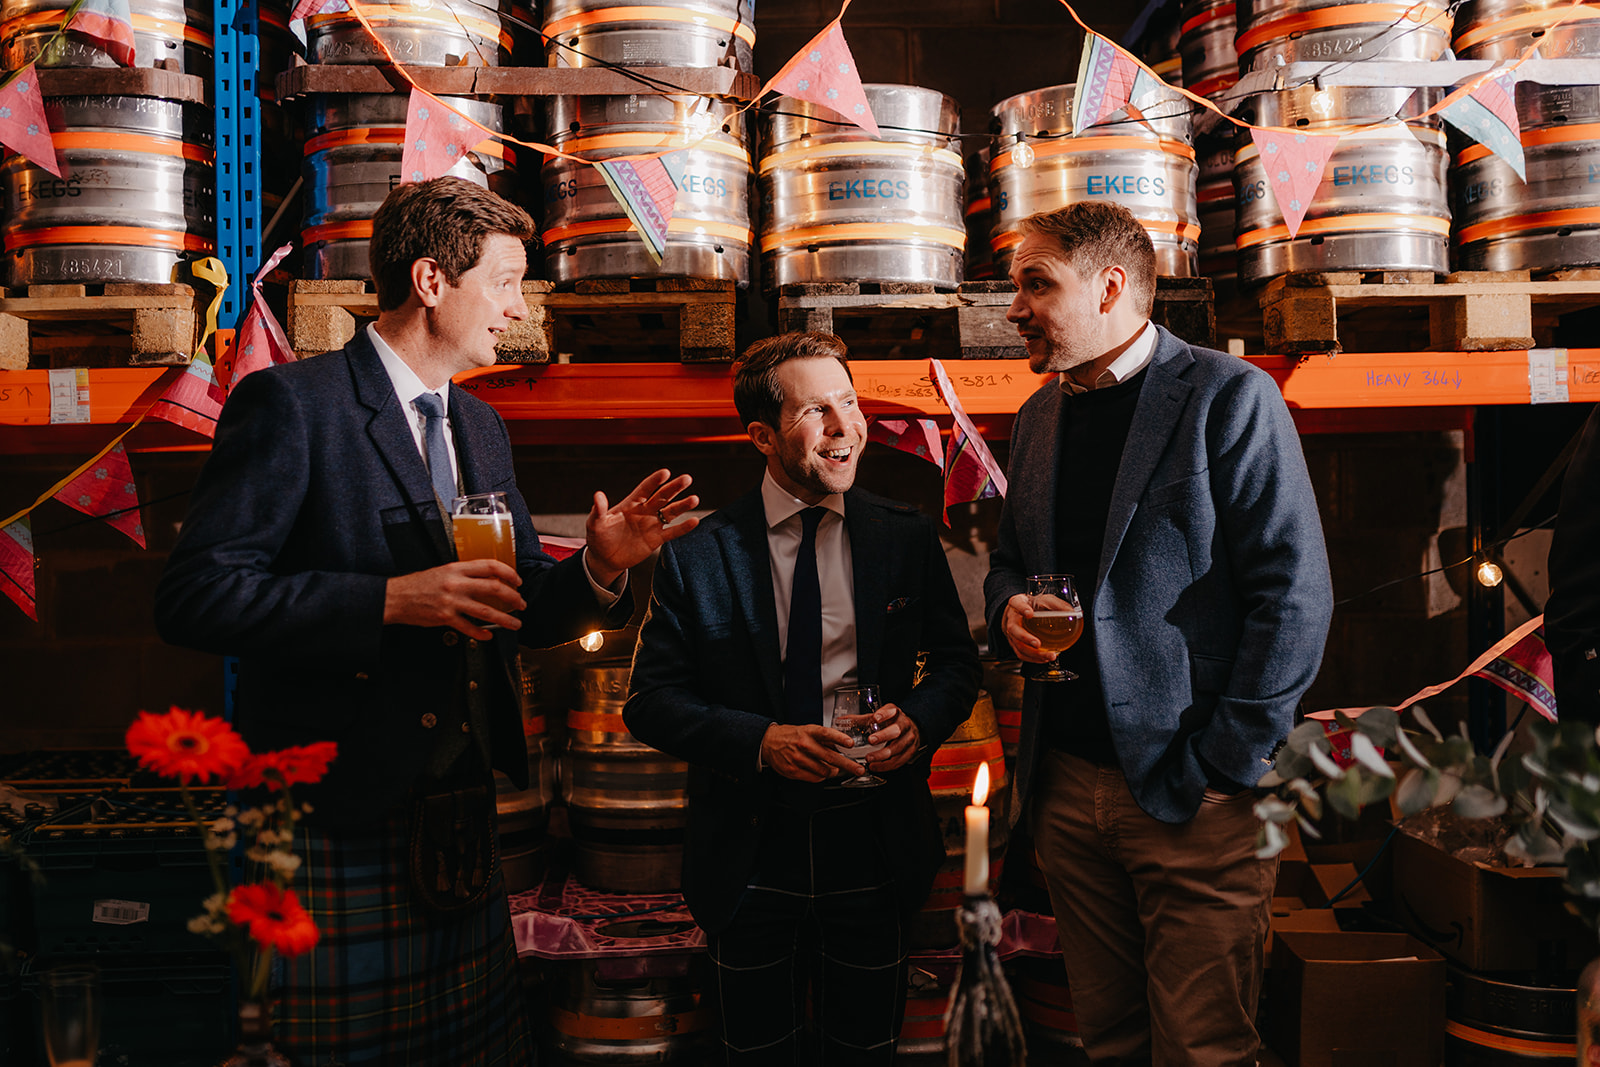 guests laugh and drink crossborders beers at taproom wedding reception in edinburgh